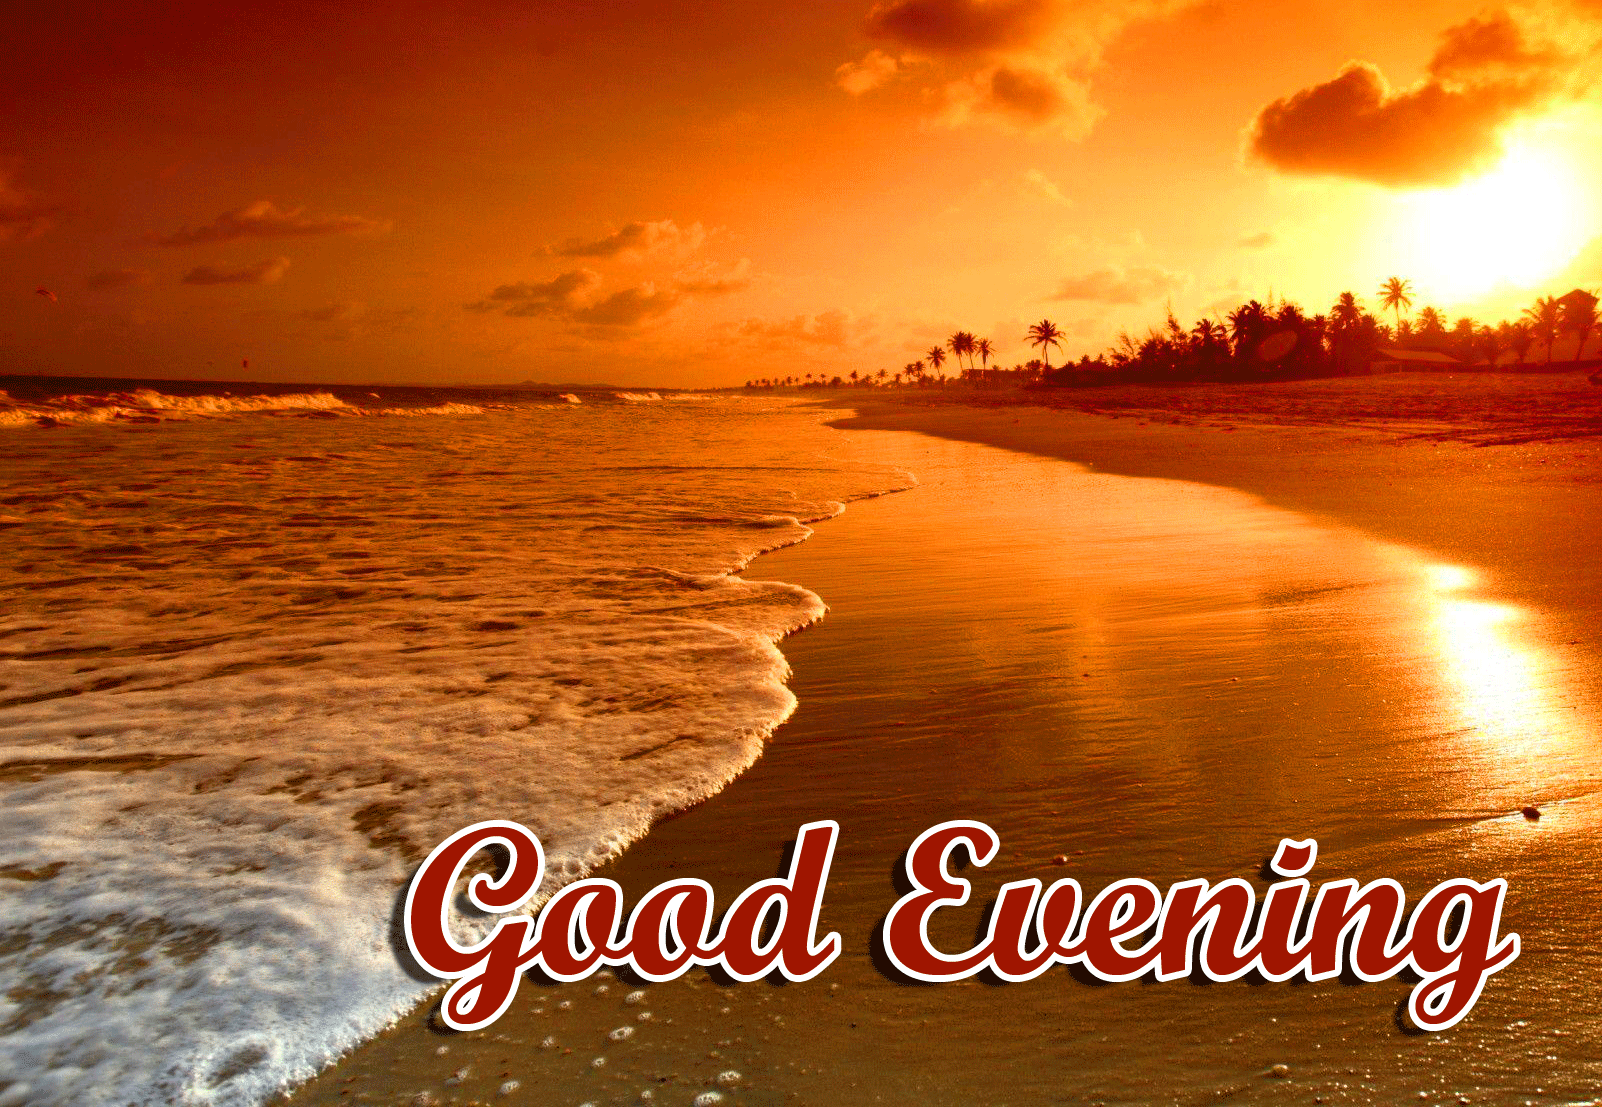 Good Evening Wishes Images Download 7